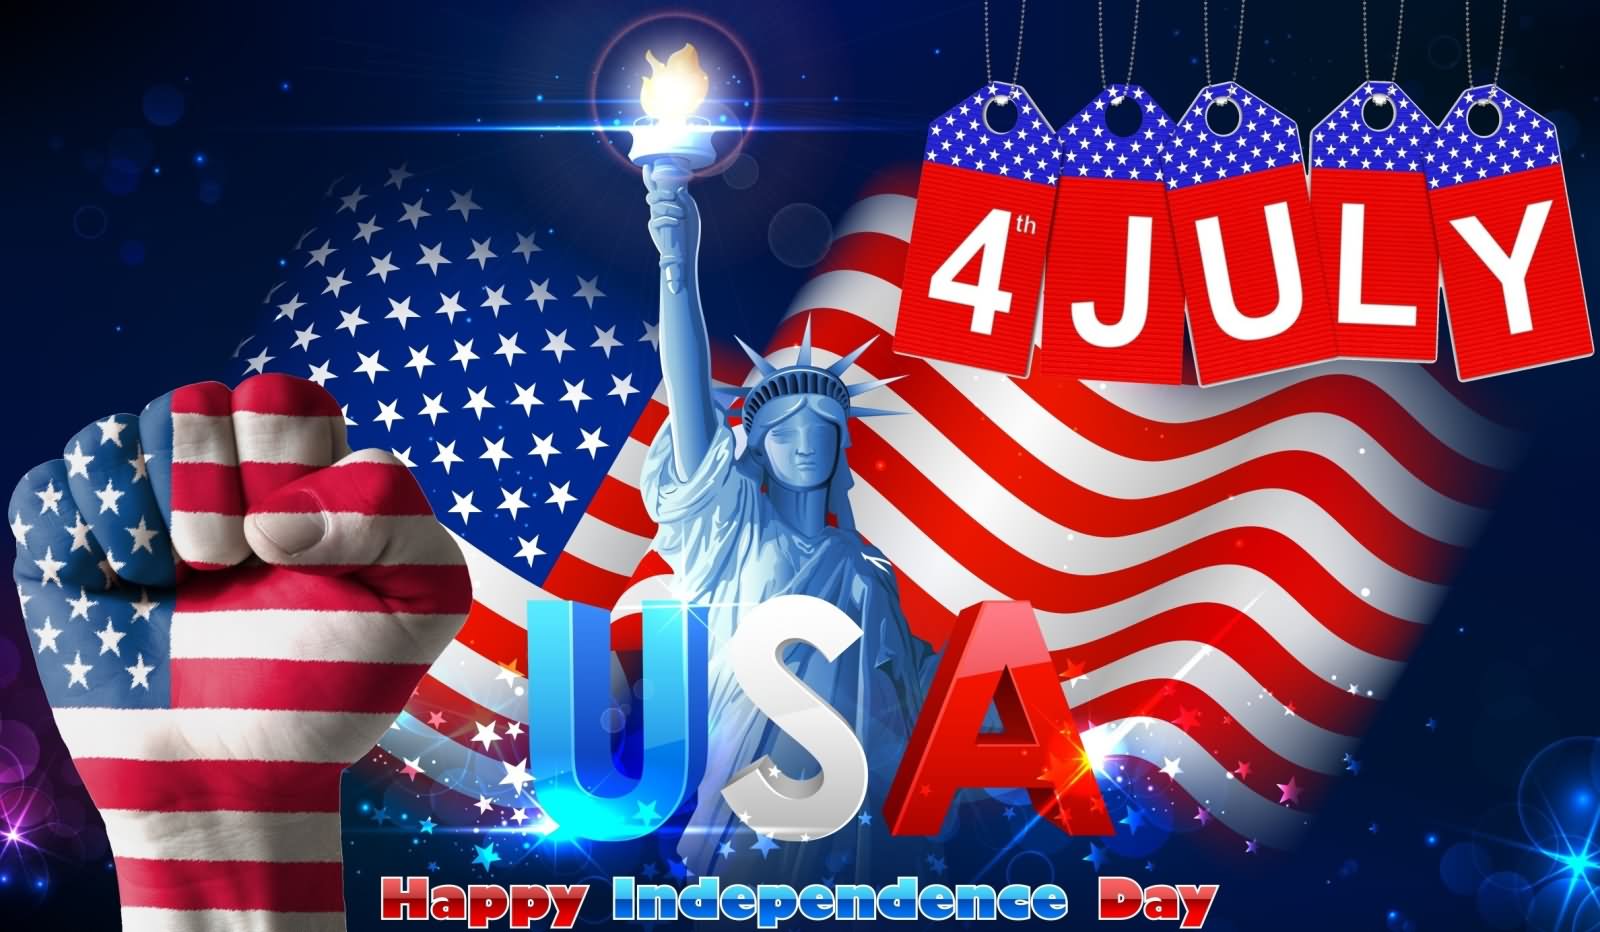 4th-July-USA-Independence-Day-Wishes